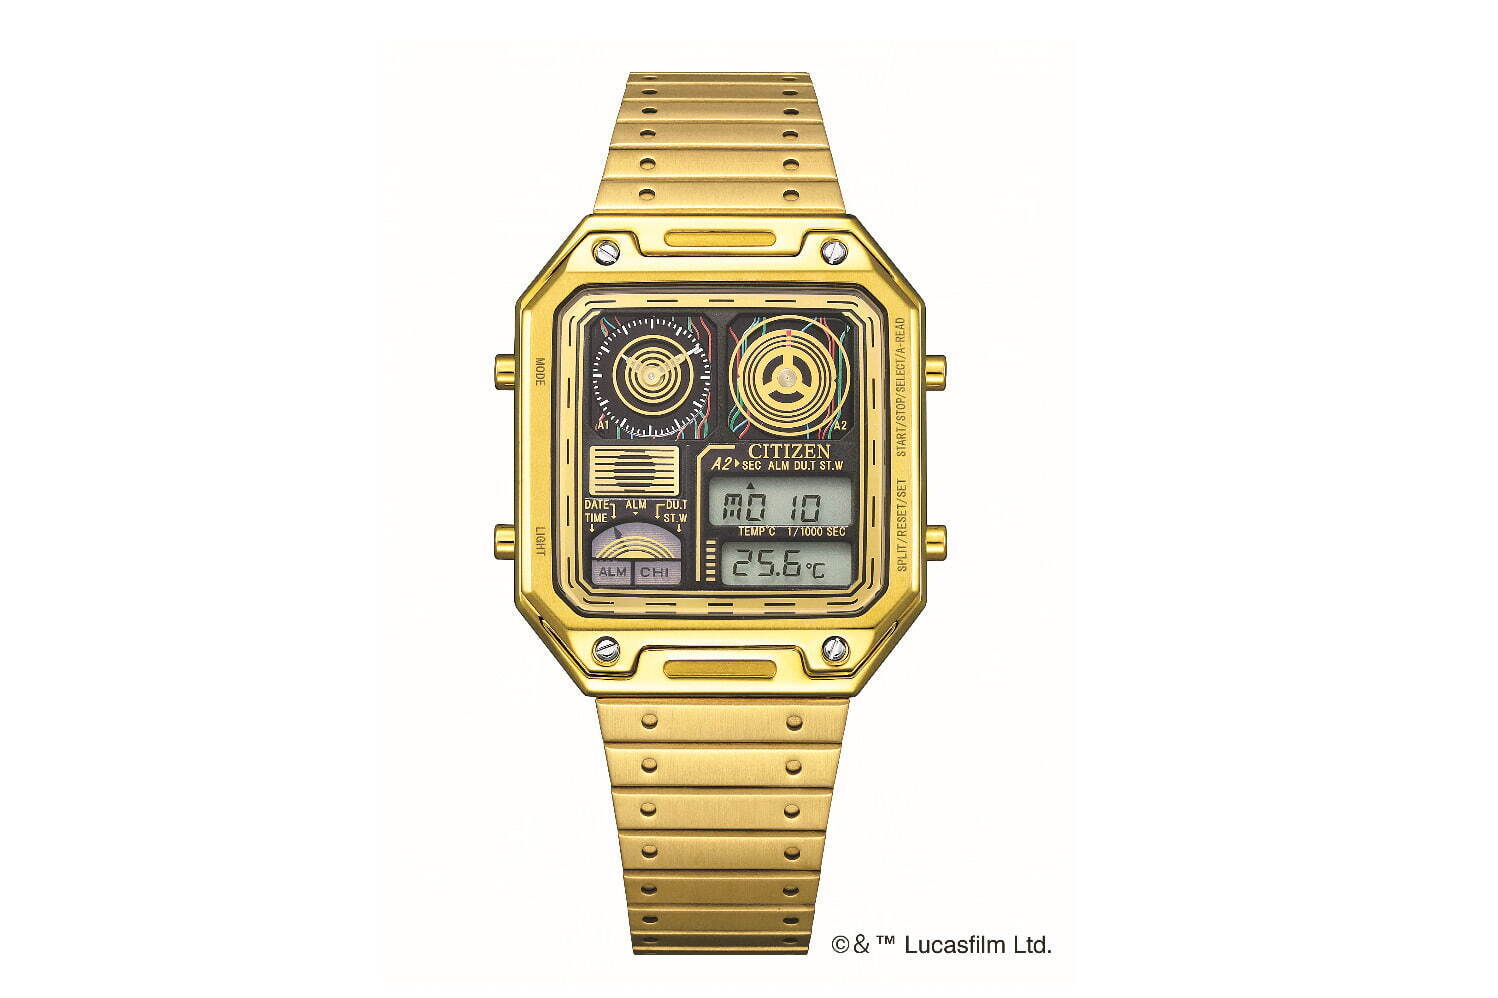 Citizen Collection Record Label Thermo Sensor Star Wars Limited Edition 44,000JPY
Character: C-3PO